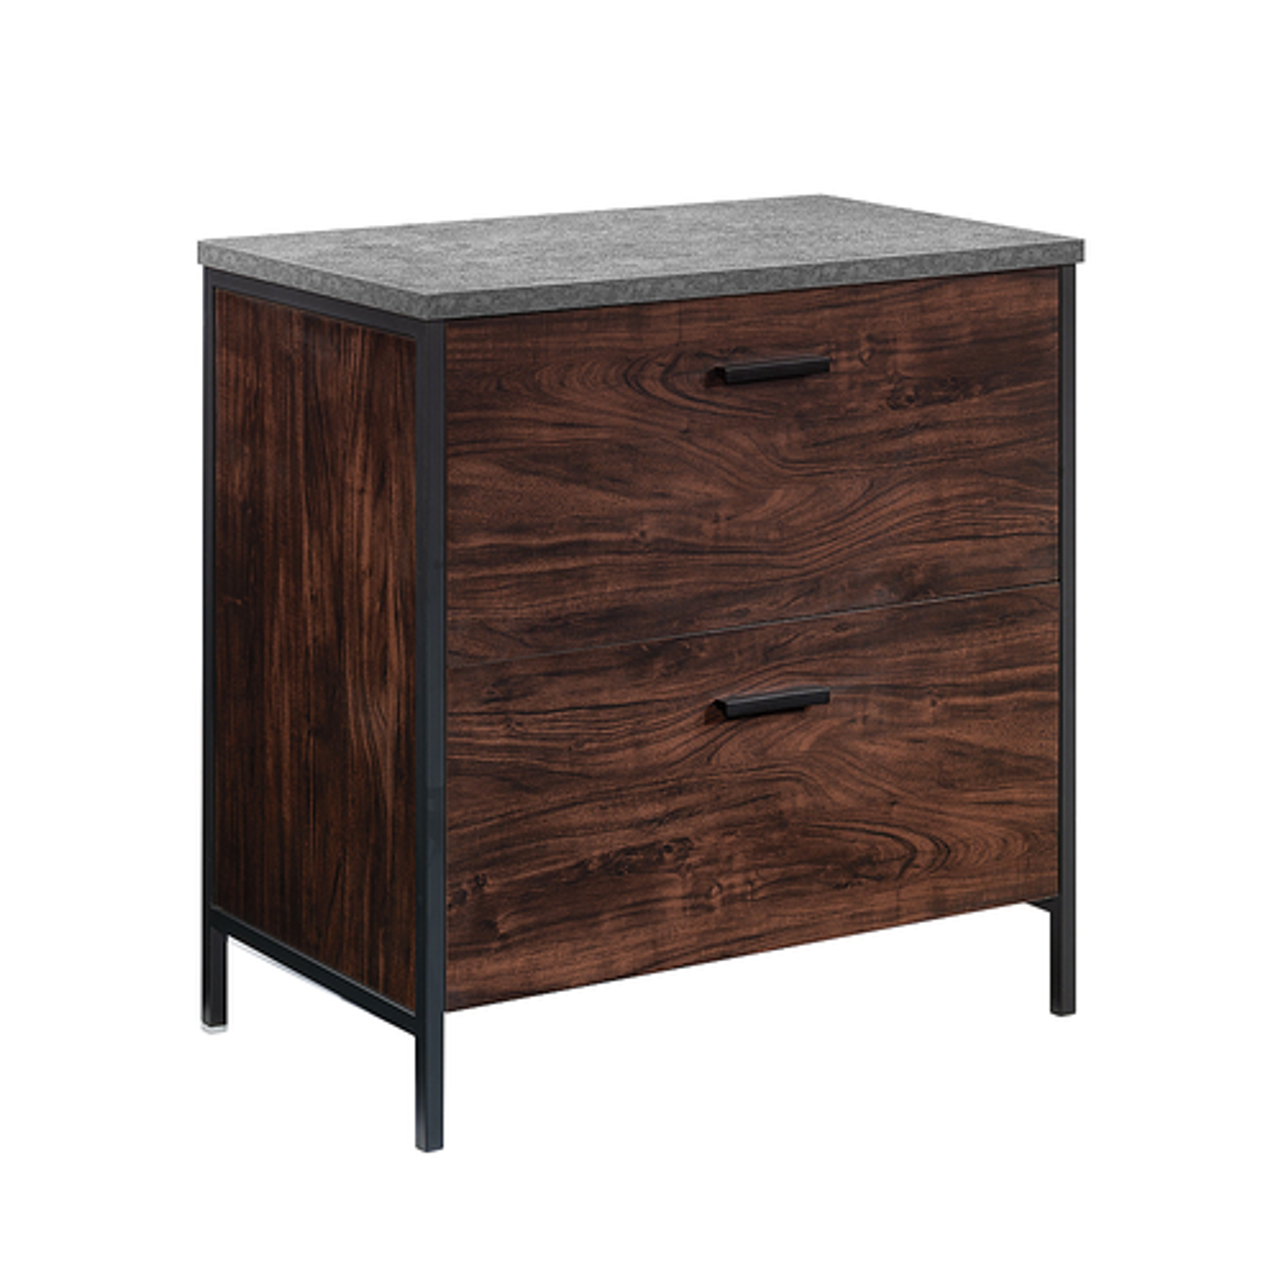 Sauder - Market Commons Lateral File Rw - Rich Walnut™